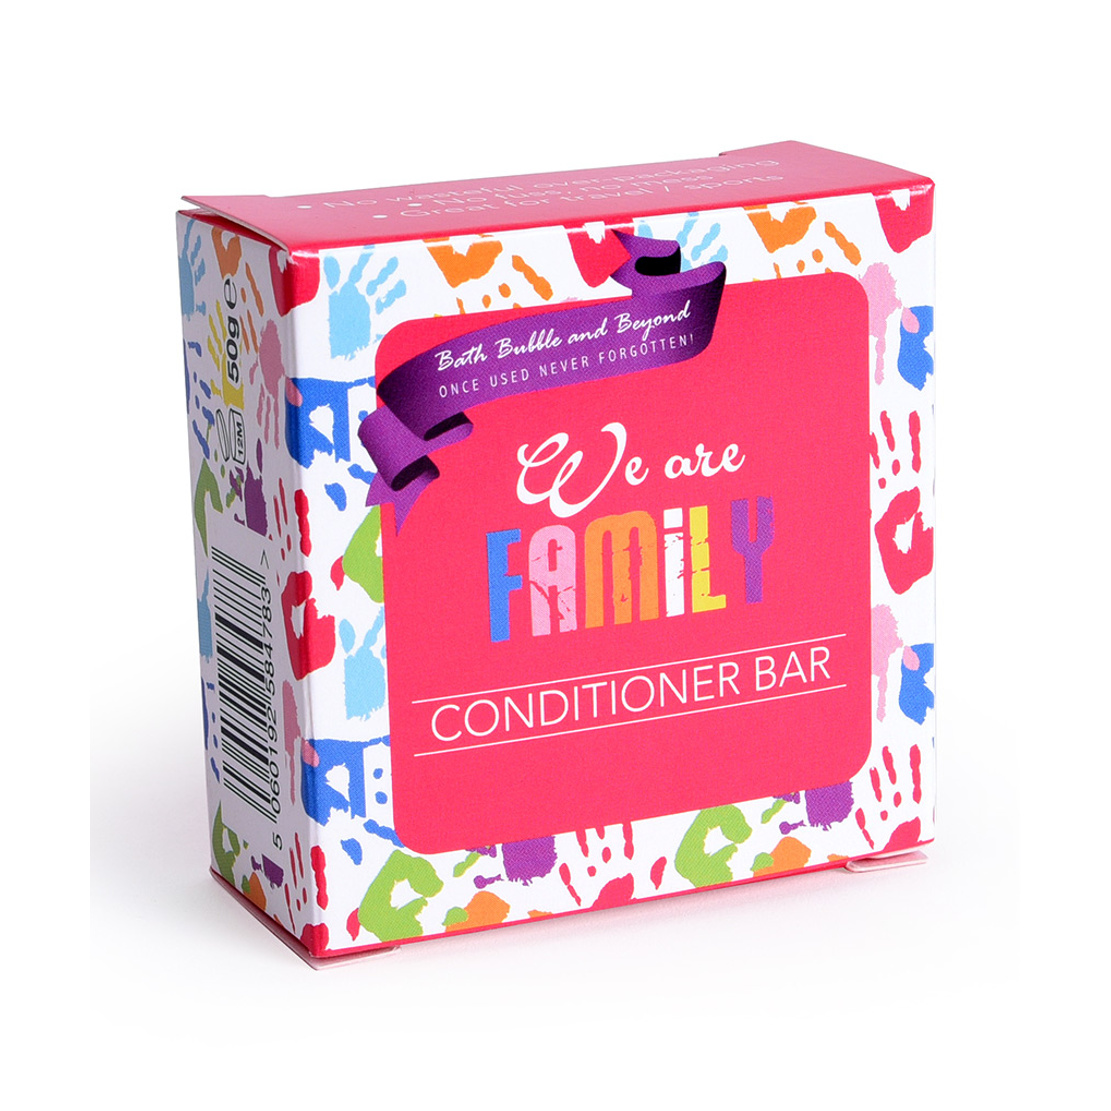 Bath Bubble and Beyond We are Family Conditioner Bar